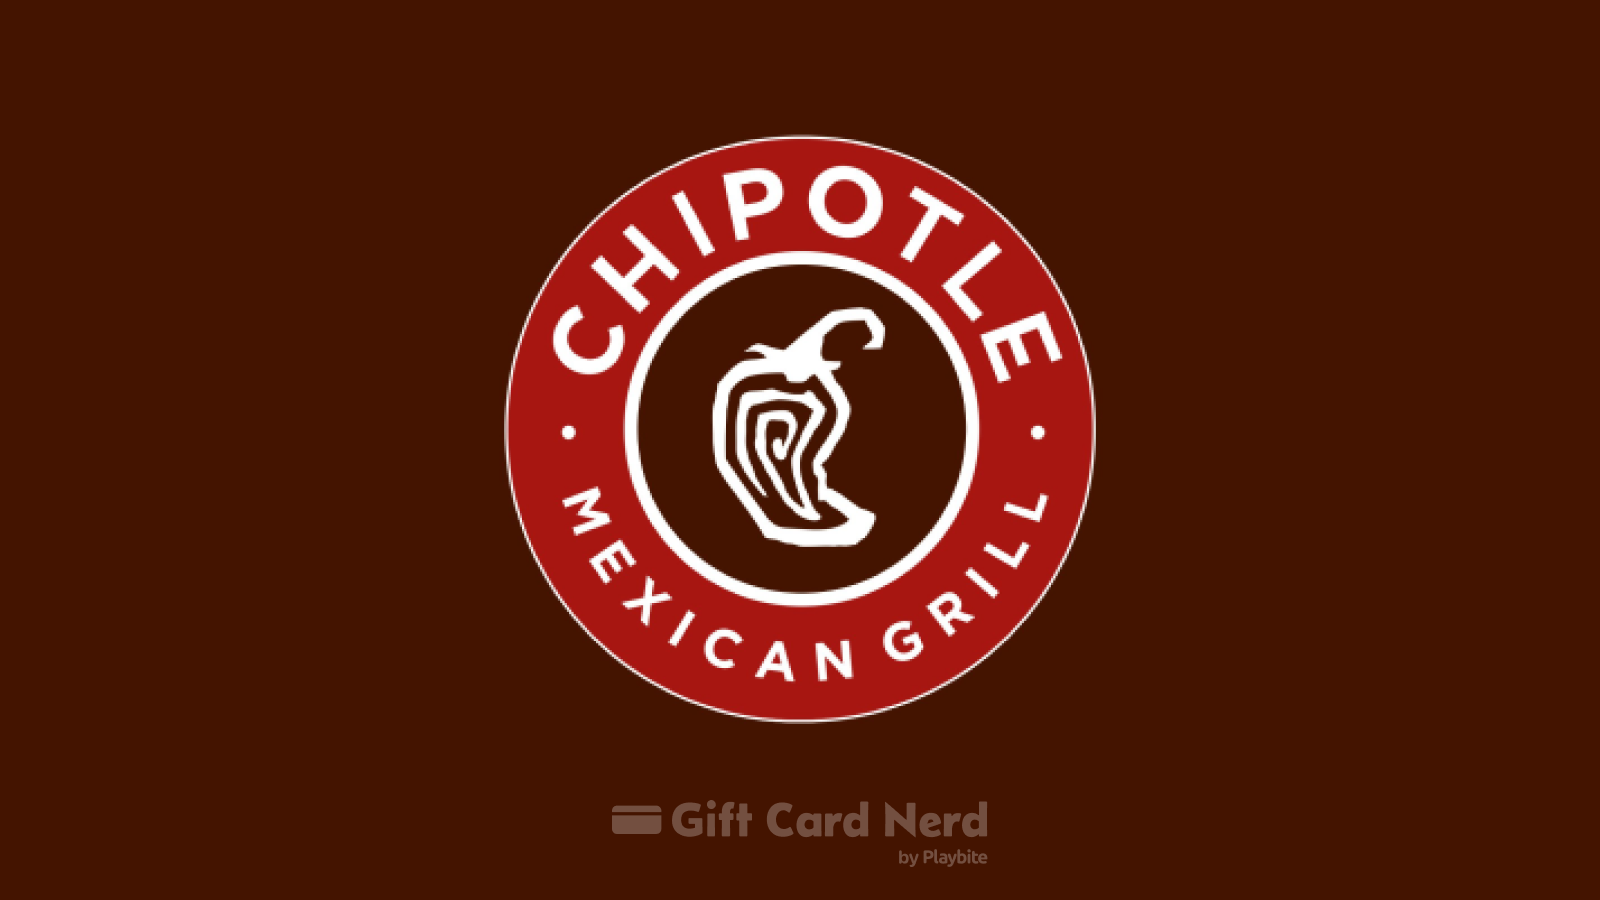 Can I Use a Chipotle Gift Card on DoorDash?